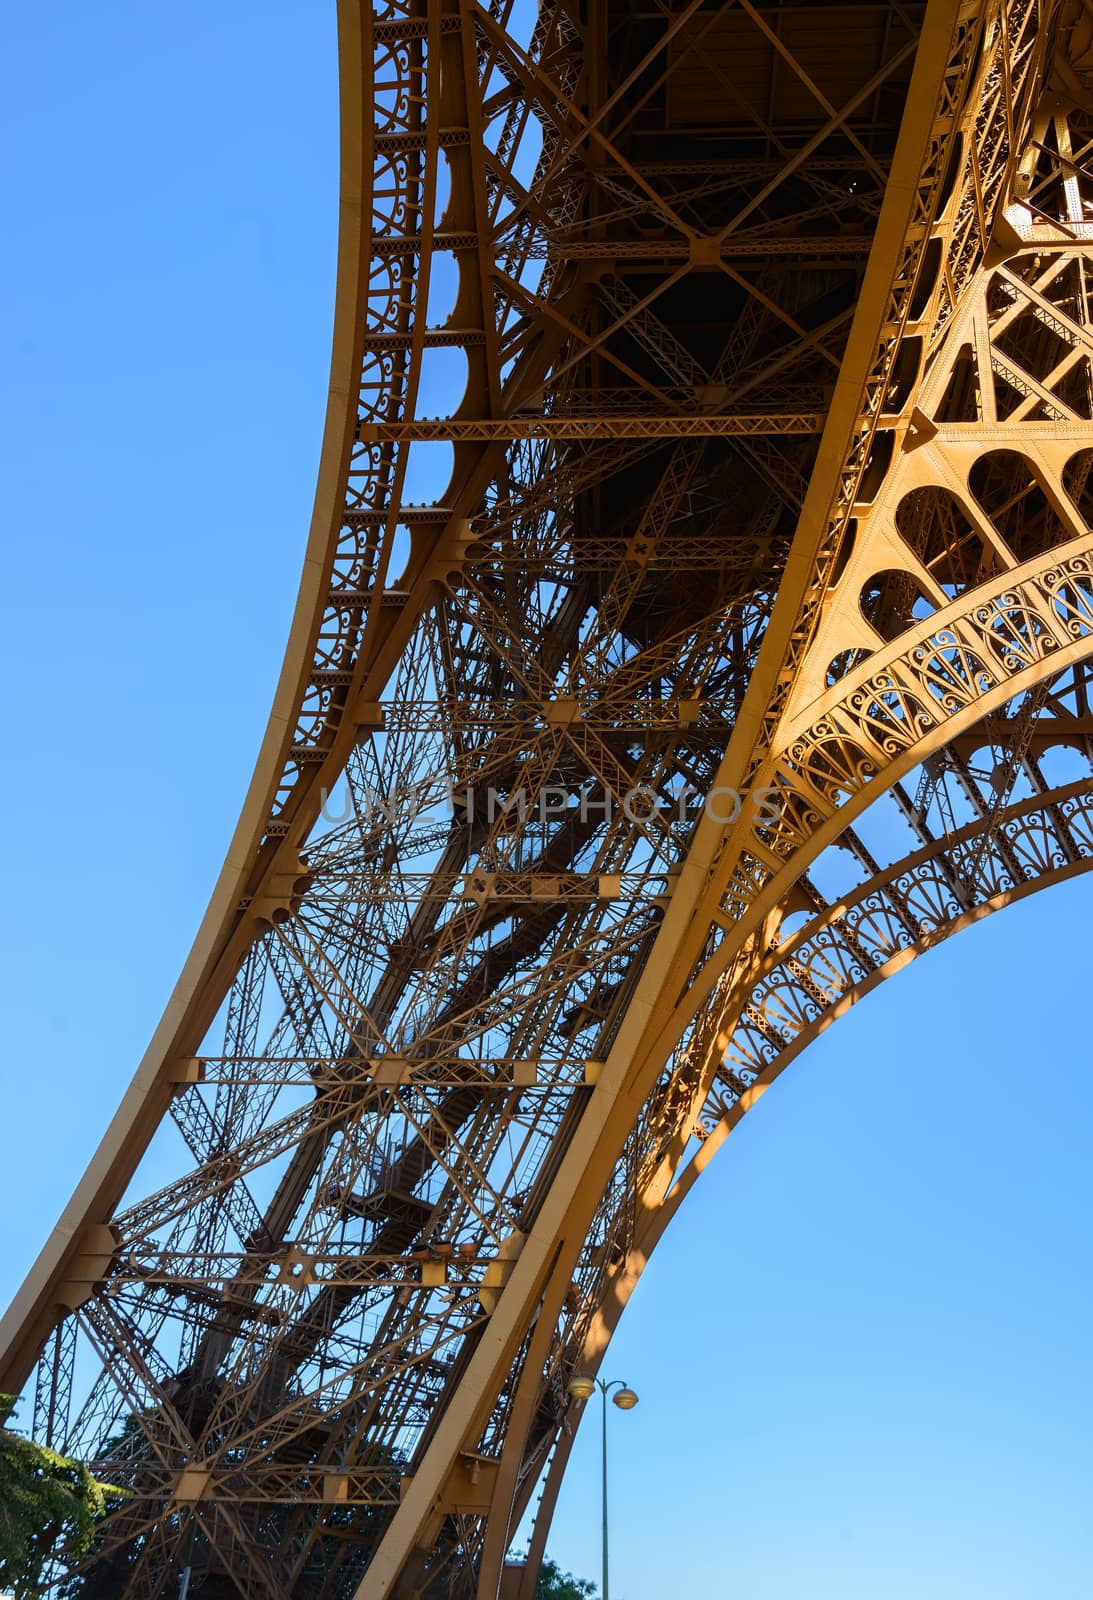 View on Eiffel Tower in Paris from below, France